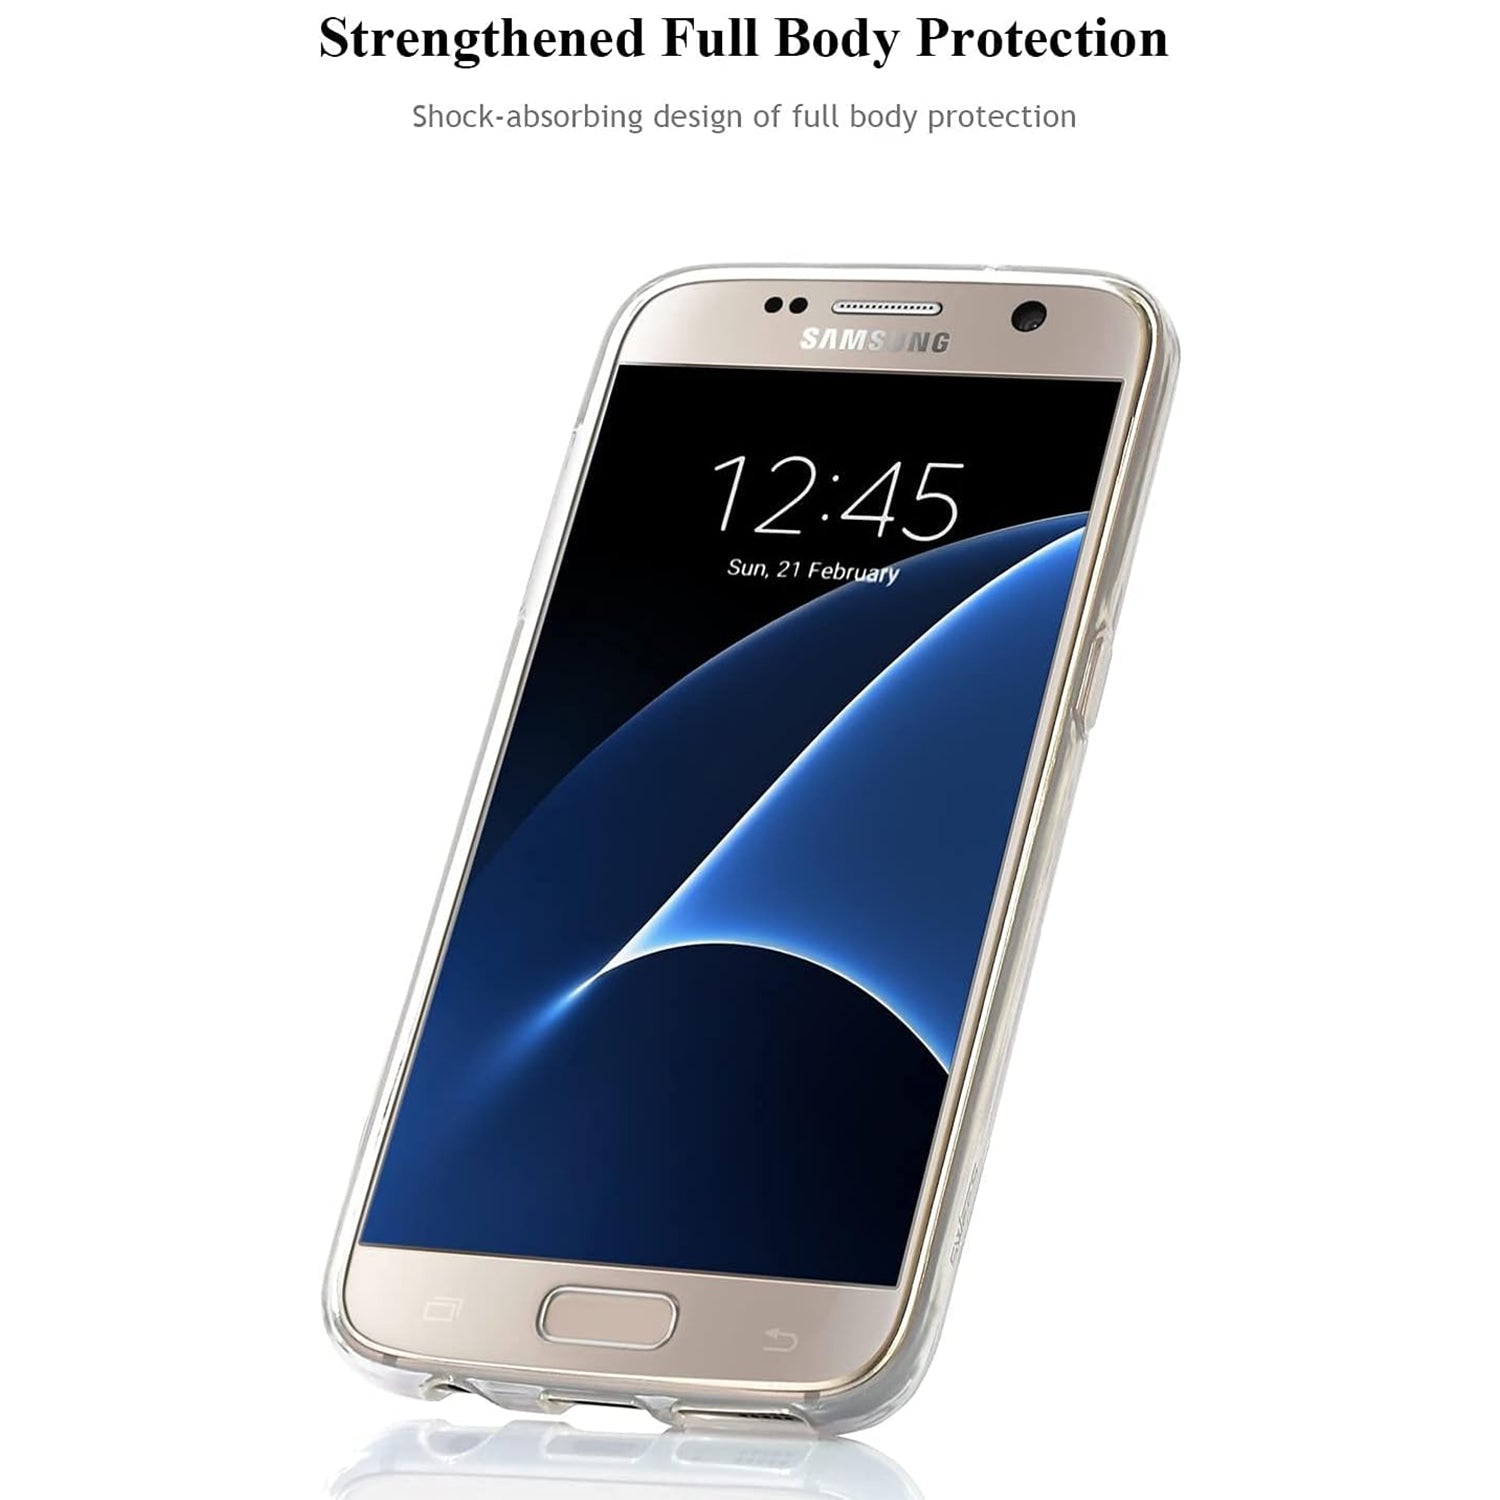 Transparent TPU Case Shockproof Drop Resistant Case Cover for Galaxy S7 - Clear